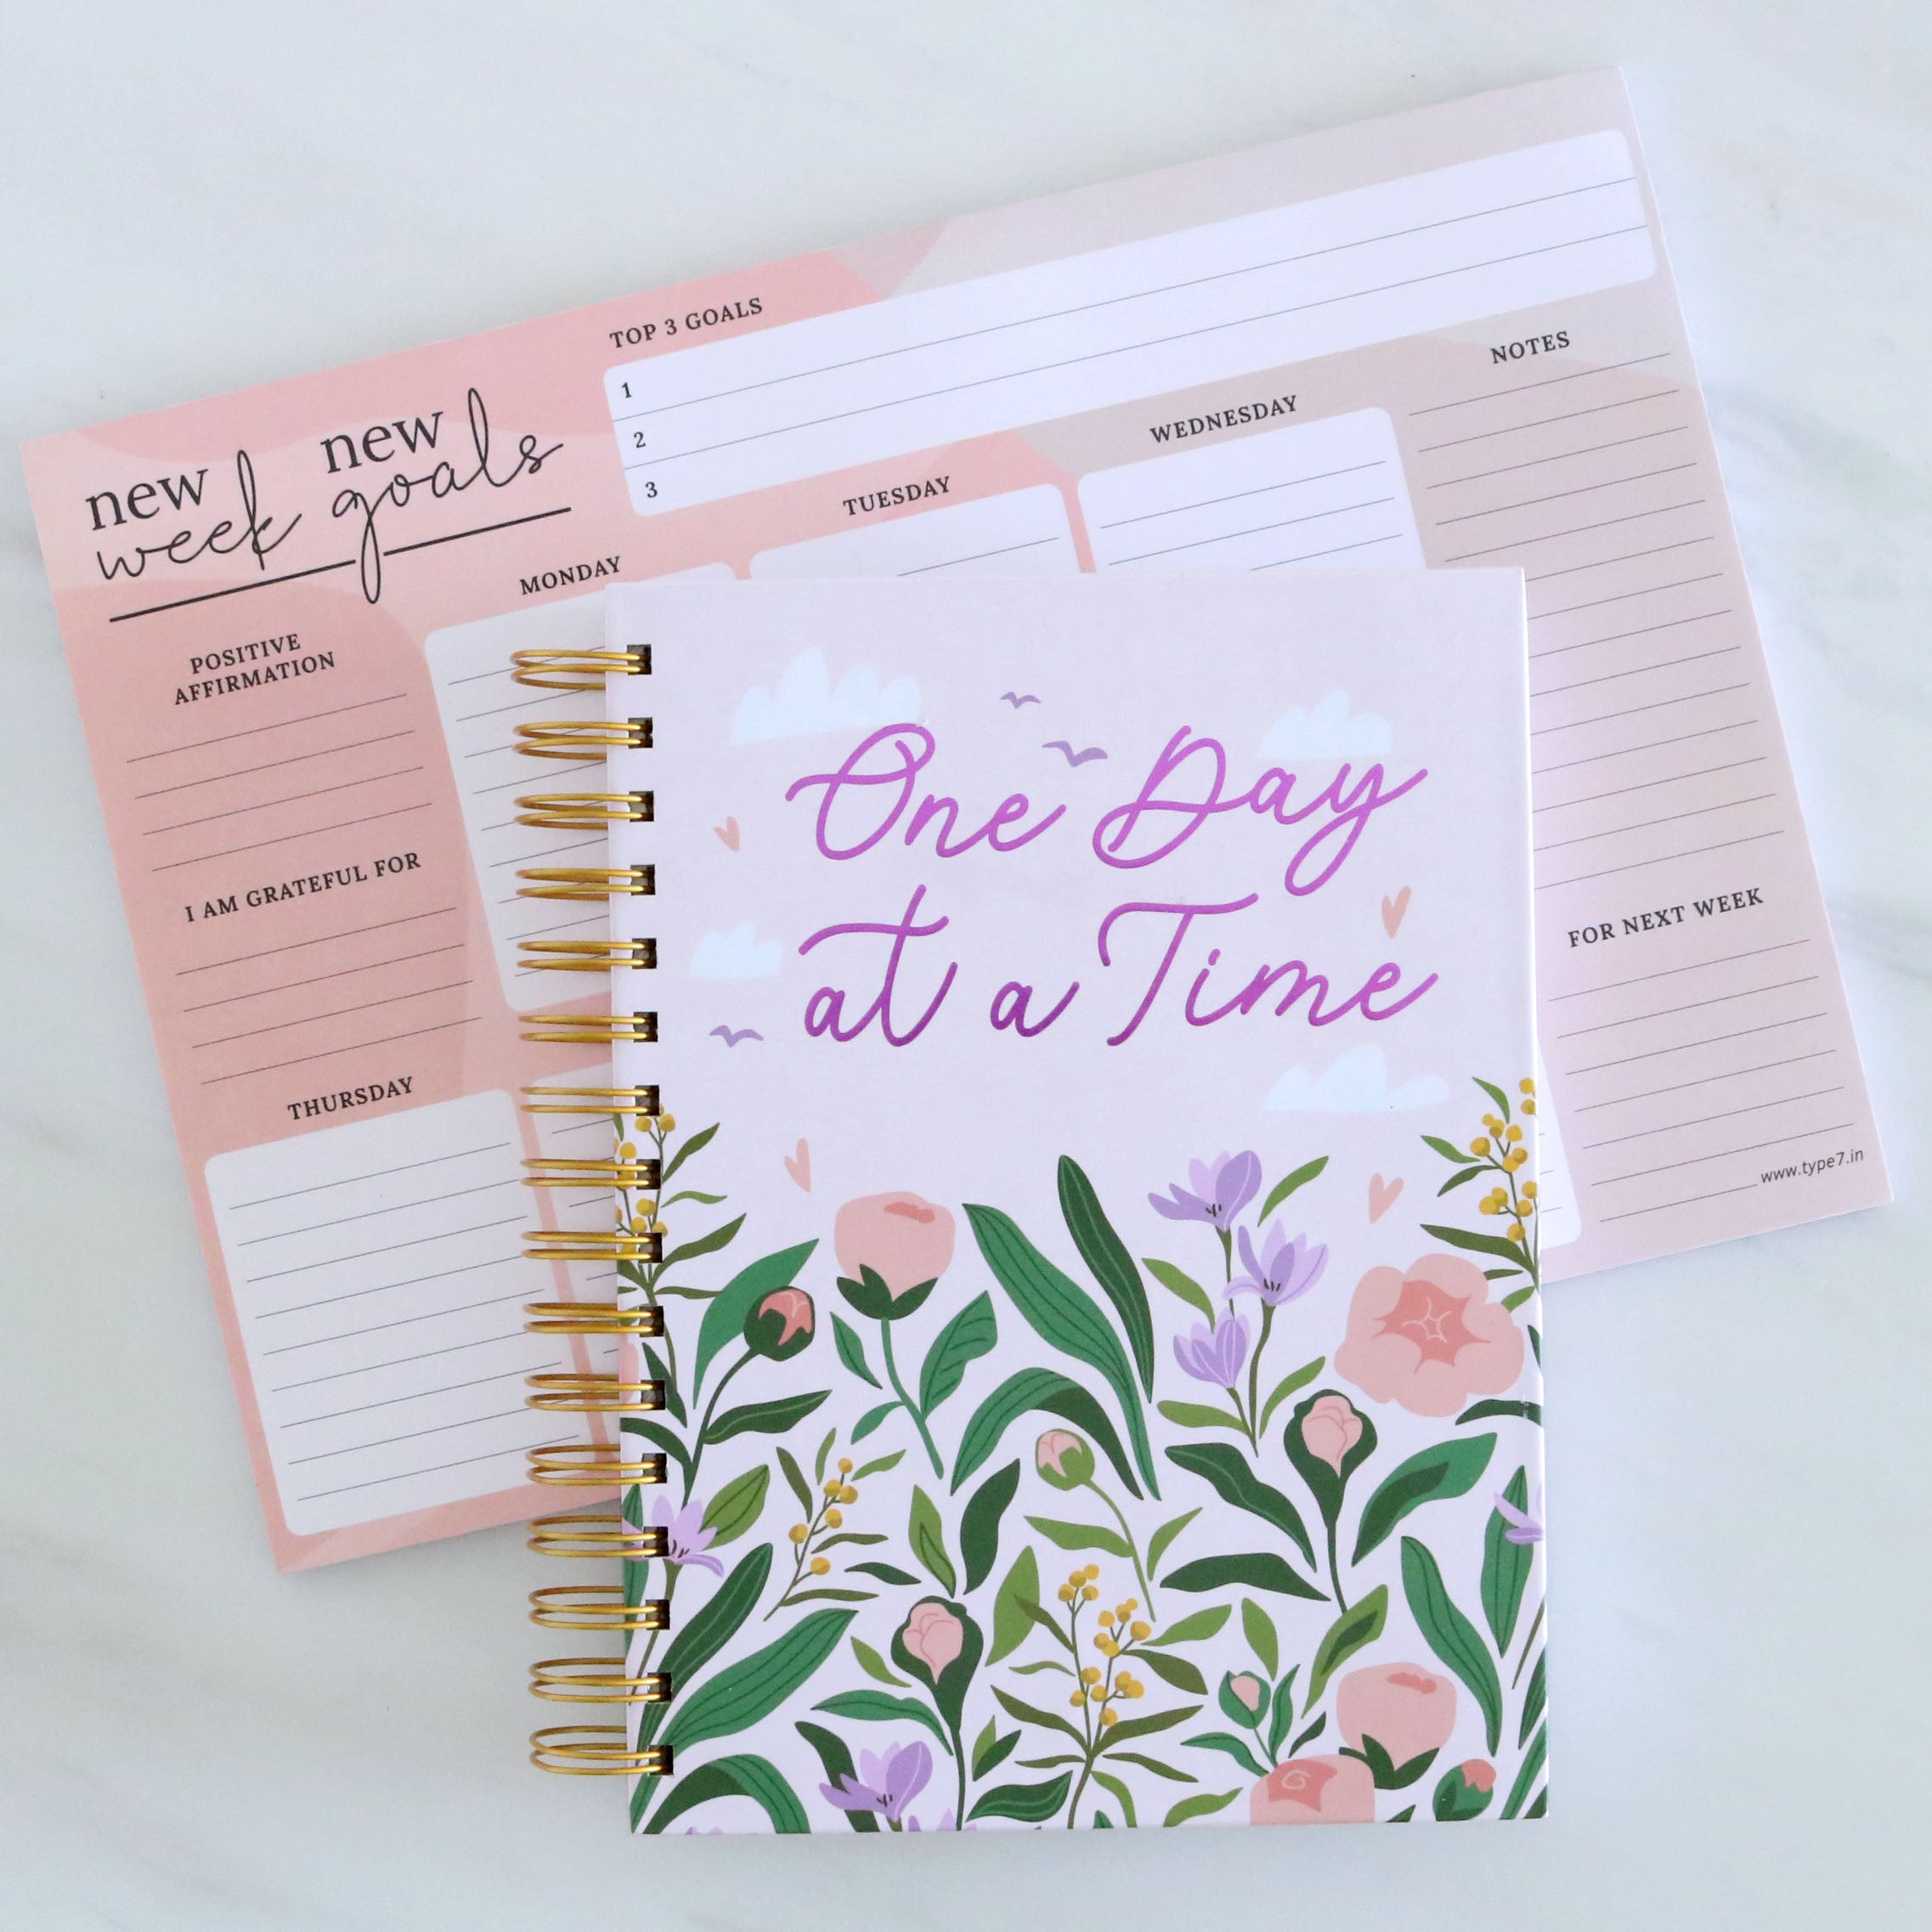 One Day At A Time Daily Planner & Weekly Planner Combo